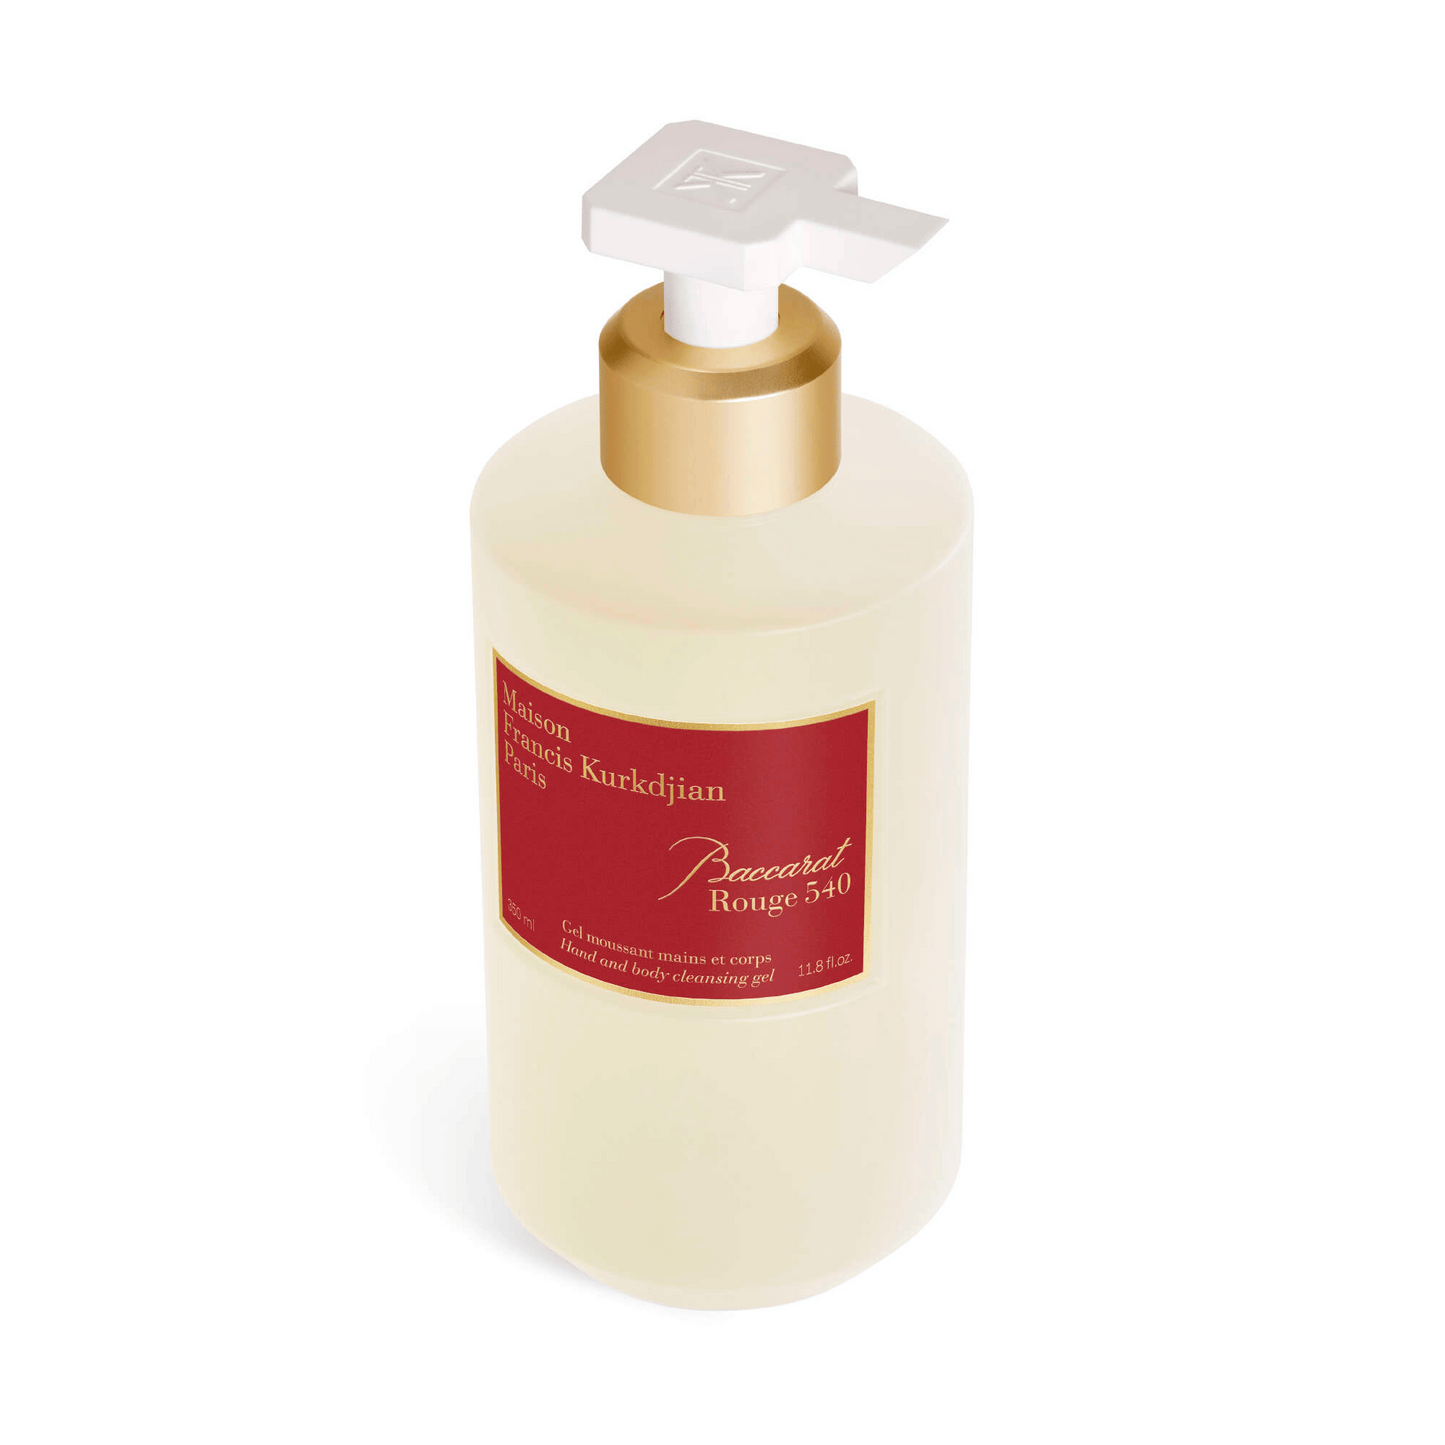 Alternate Image of Hand and Body Cleansing Gel - Baccarat Rouge